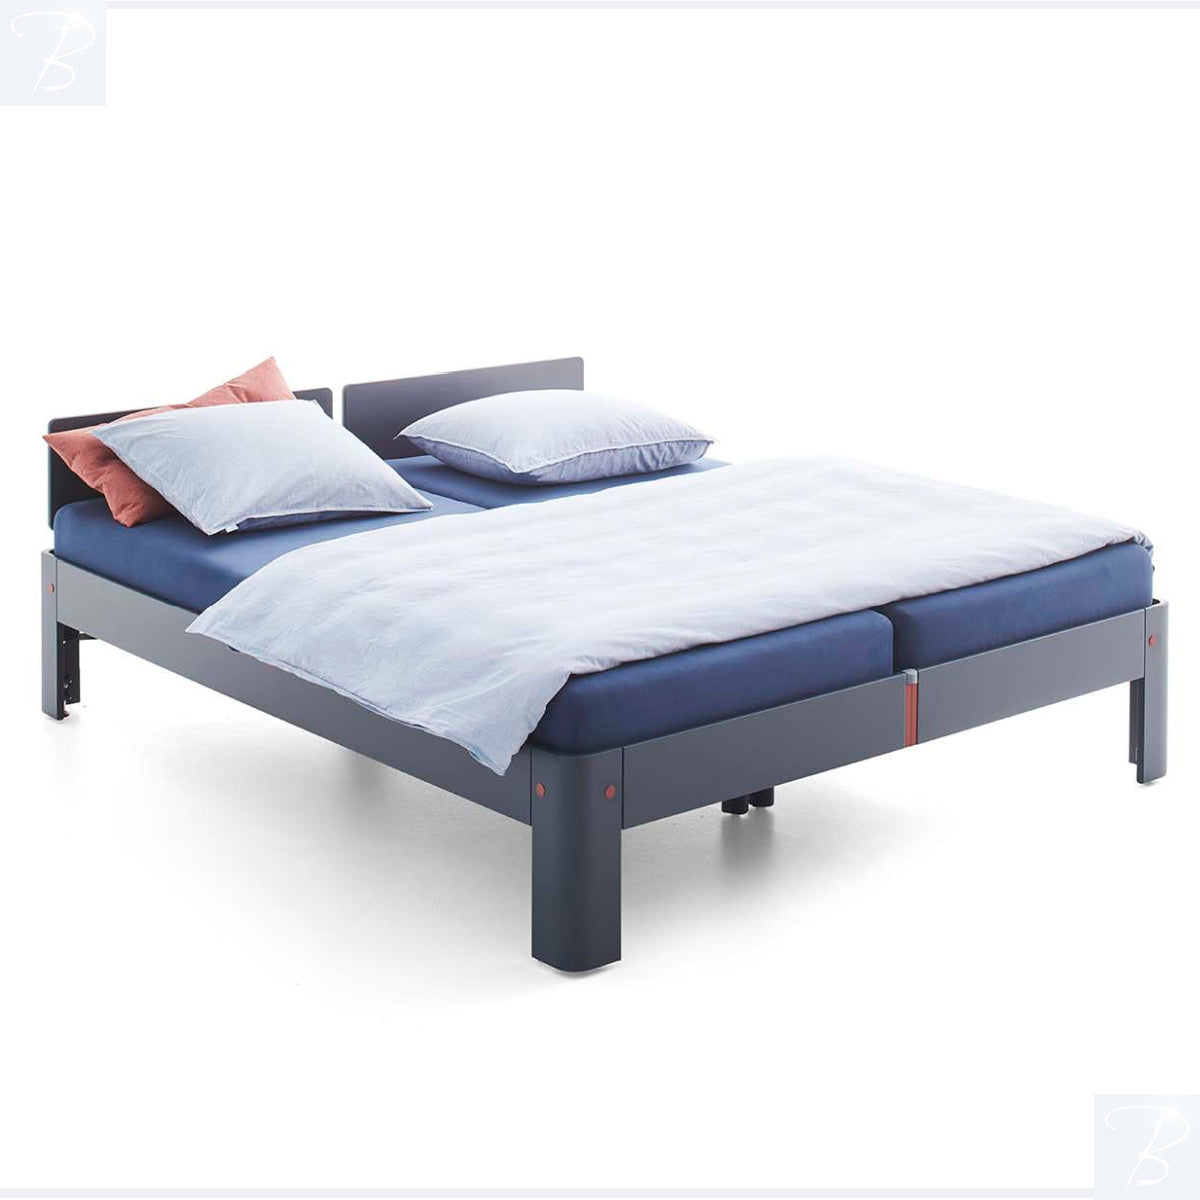 Auronde bed 1500, Auping - Lit Auronde 1500, Auping